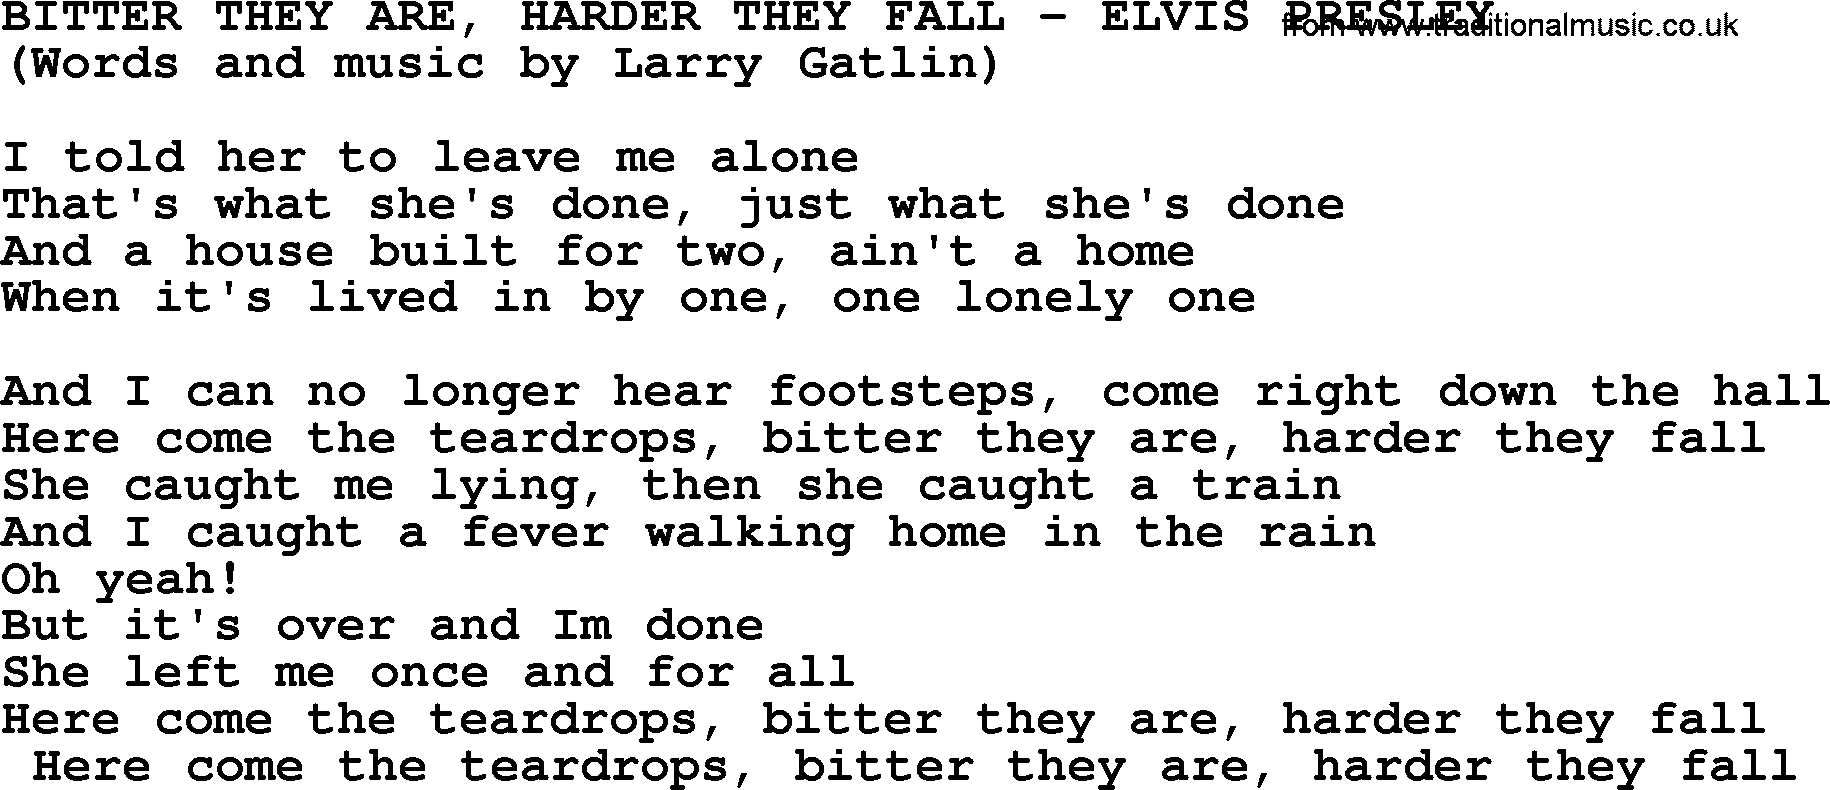 Elvis Presley song: Bitter They Are, Harder They Fall lyrics